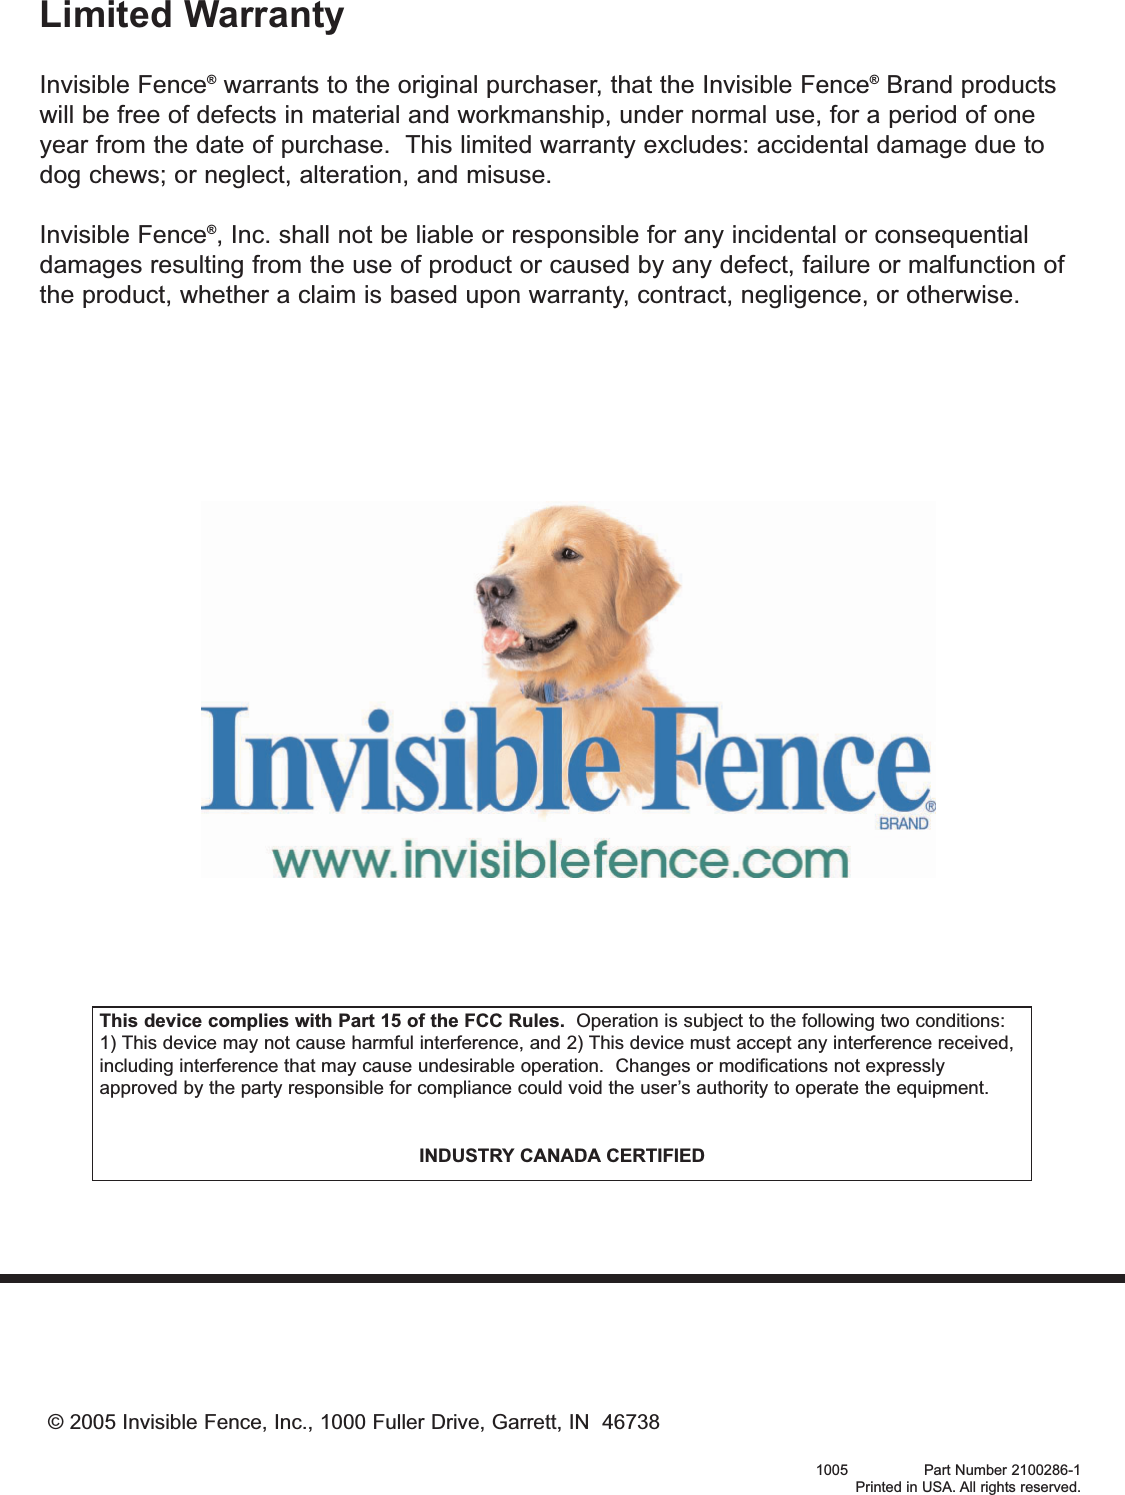 Limited WarrantyInvisible Fence®warrants to the original purchaser, that the Invisible Fence®Brand productswill be free of defects in material and workmanship, under normal use, for a period of oneyear from the date of purchase.  This limited warranty excludes: accidental damage due todog chews; or neglect, alteration, and misuse.Invisible Fence®, Inc. shall not be liable or responsible for any incidental or consequentialdamages resulting from the use of product or caused by any defect, failure or malfunction ofthe product, whether a claim is based upon warranty, contract, negligence, or otherwise.© 2005 Invisible Fence, Inc., 1000 Fuller Drive, Garrett, IN  467381005                 Part Number 2100286-1Printed in USA. All rights reserved.This device complies with Part 15 of the FCC Rules. Operation is subject to the following two conditions:1) This device may not cause harmful interference, and 2) This device must accept any interference received,including interference that may cause undesirable operation.  Changes or modifications not expresslyapproved by the party responsible for compliance could void the user’s authority to operate the equipment.INDUSTRY CANADA CERTIFIED